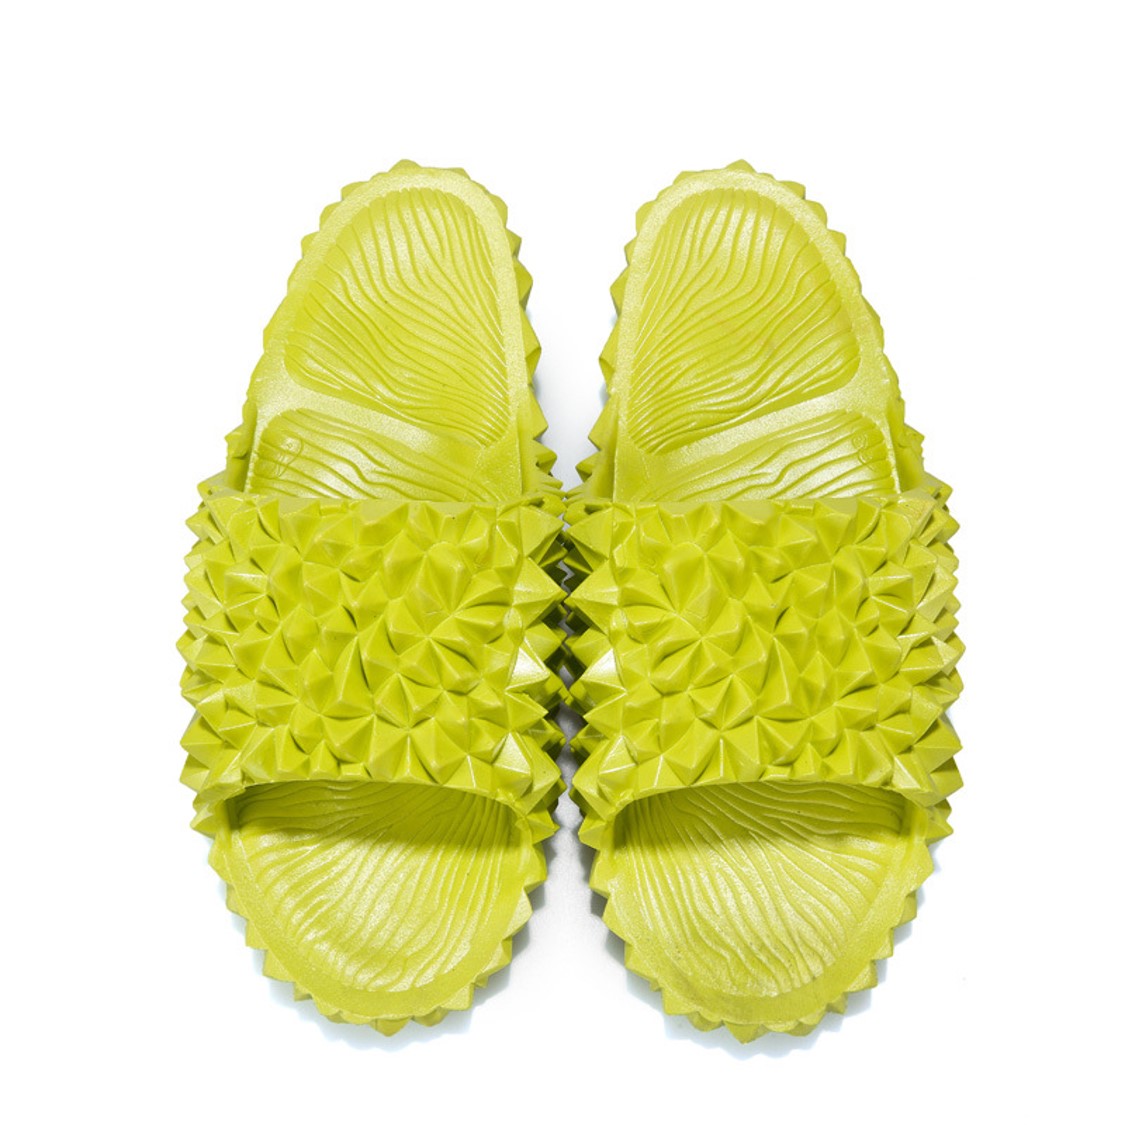 These Durian Slippers Let You Choose The "Ripeness" Level Of Our WFH Staple